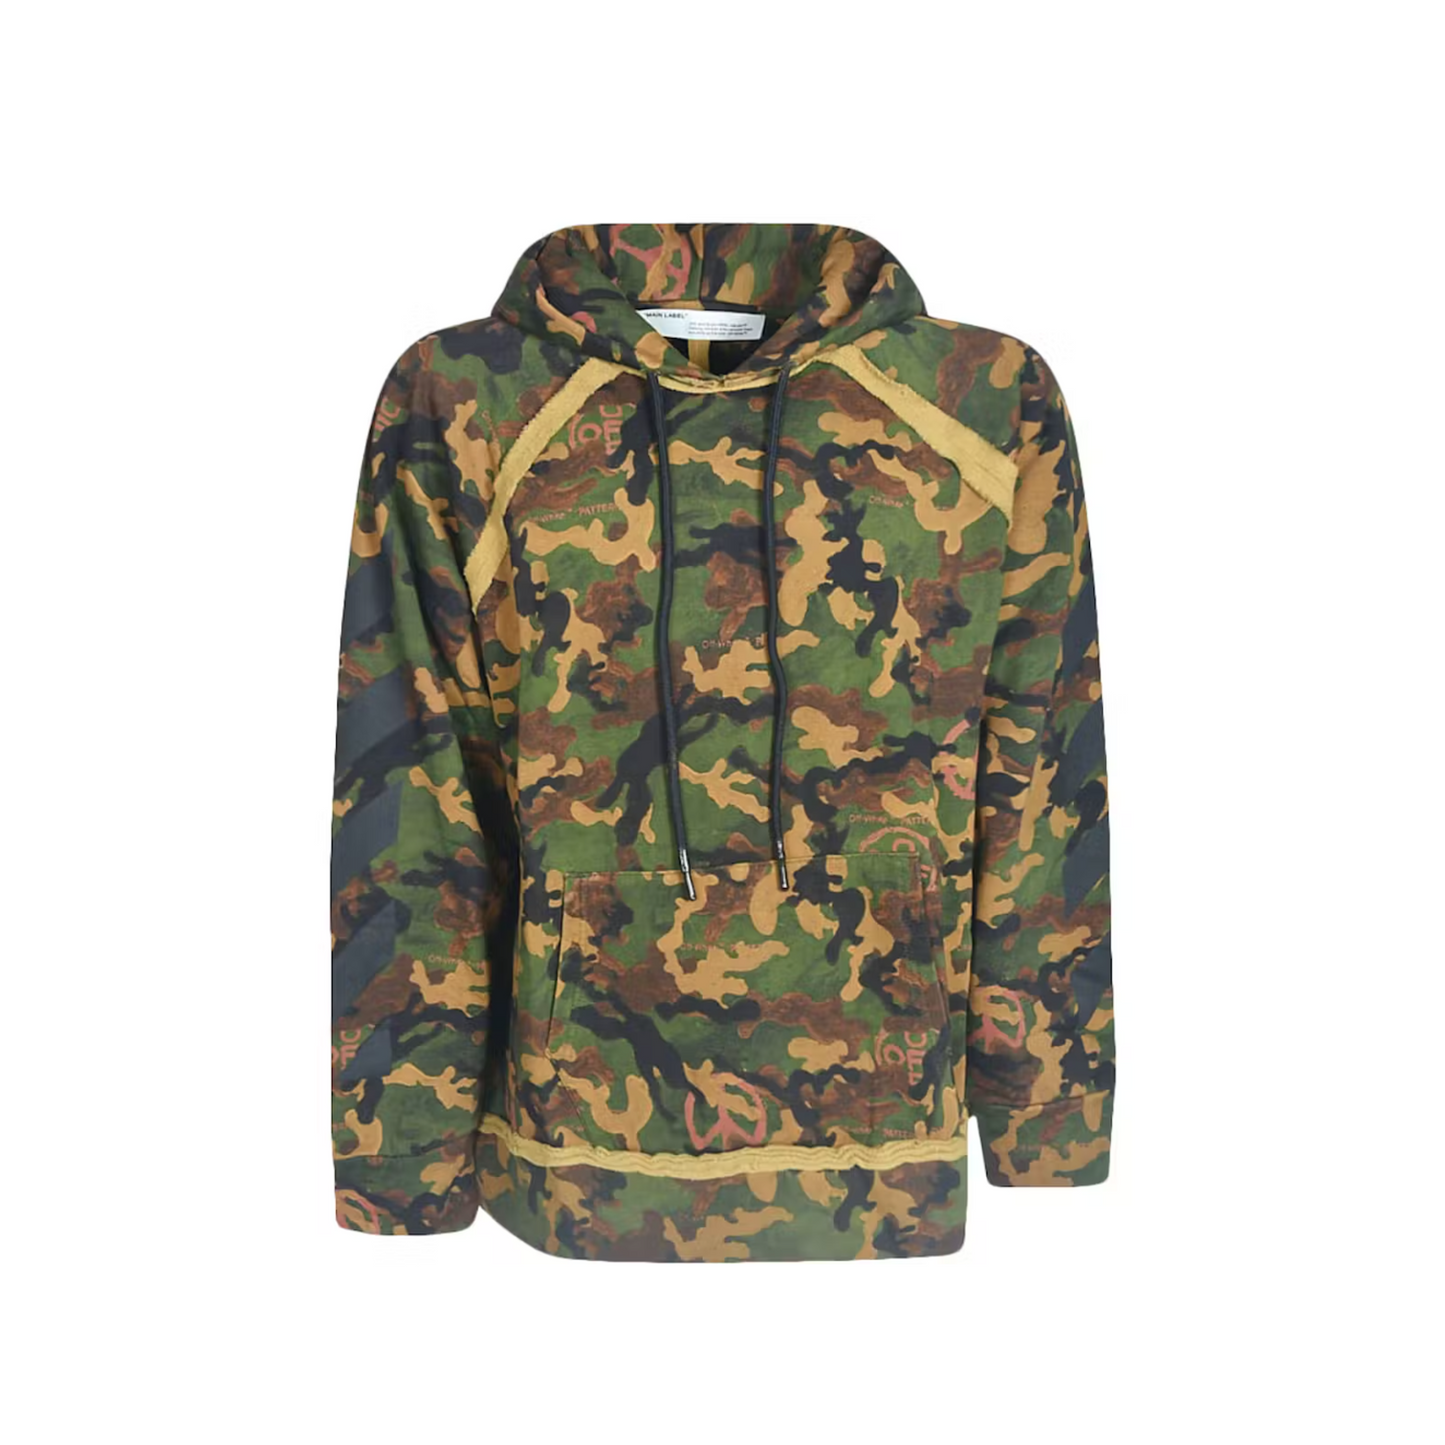 Off-White Camo Arrows - Hoodie - The Global Hype